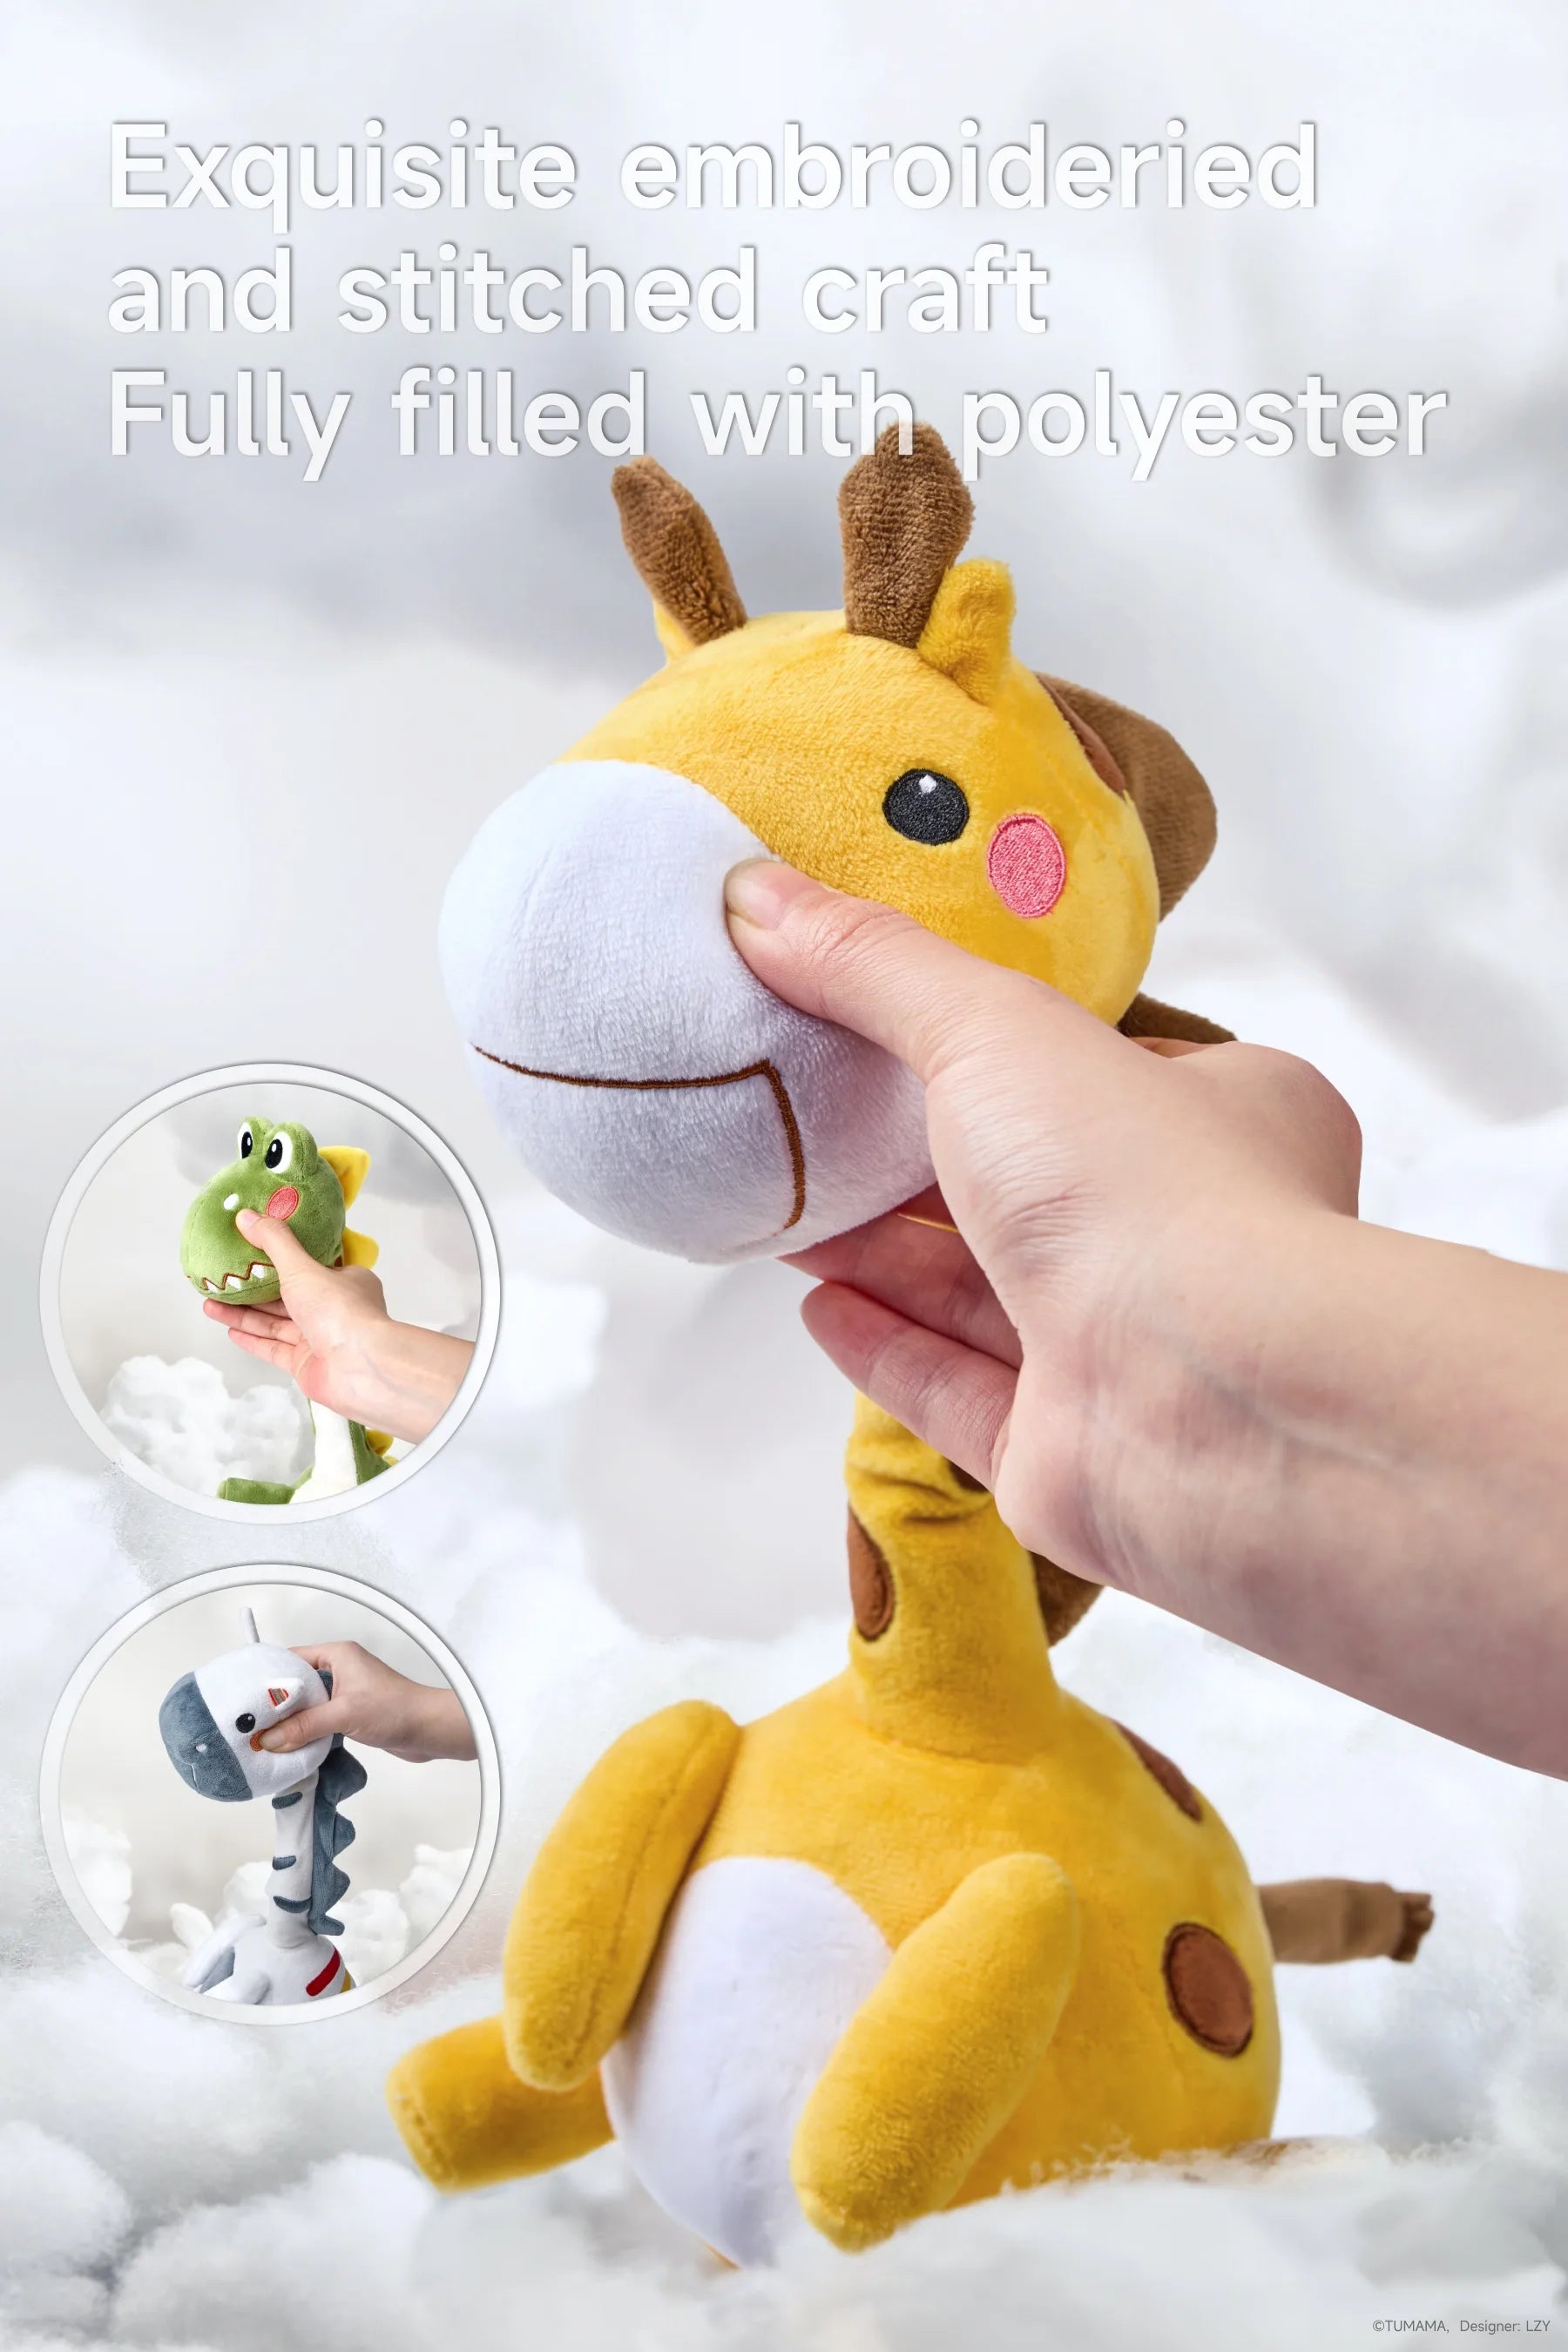 Toddler_s voice recording toy with dancing and talking elements